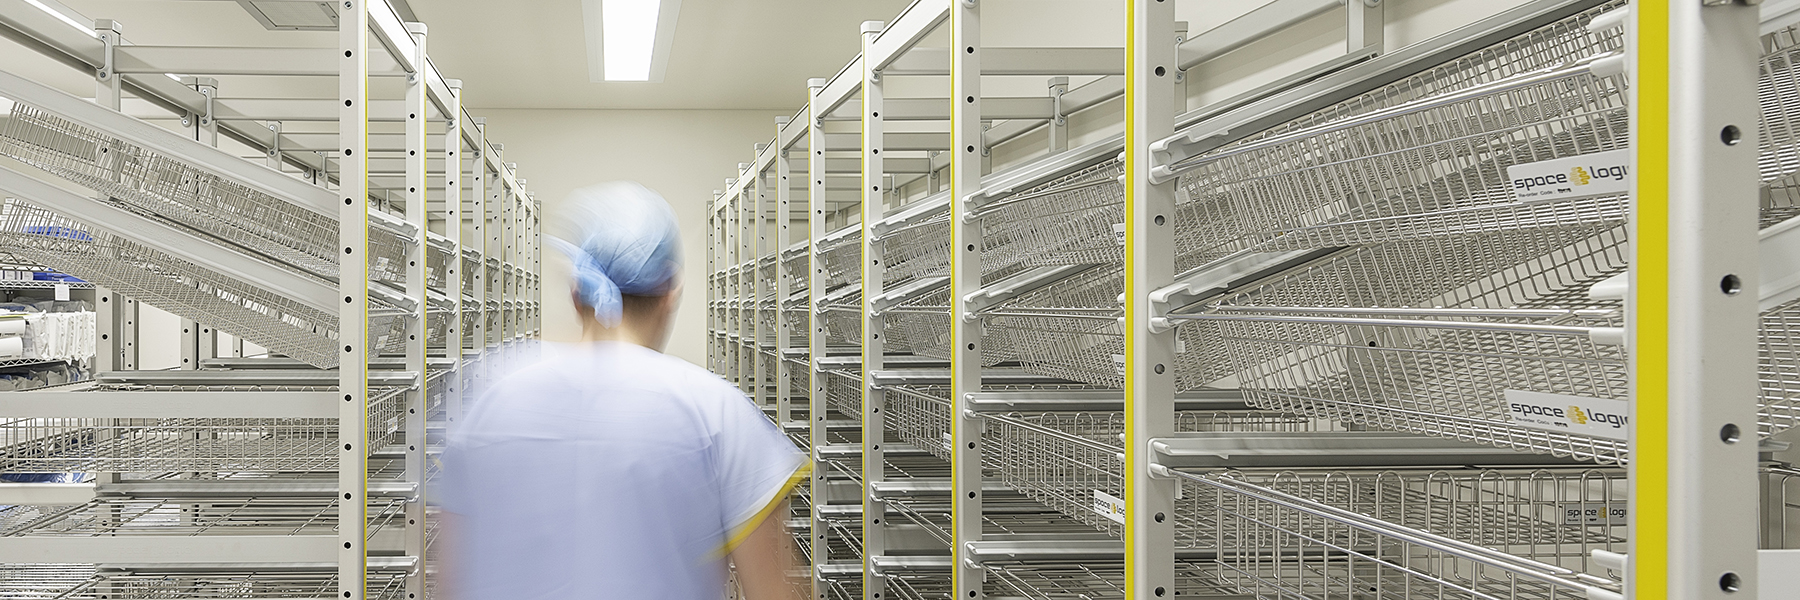 sterirack baskets and shelving storage healthcare